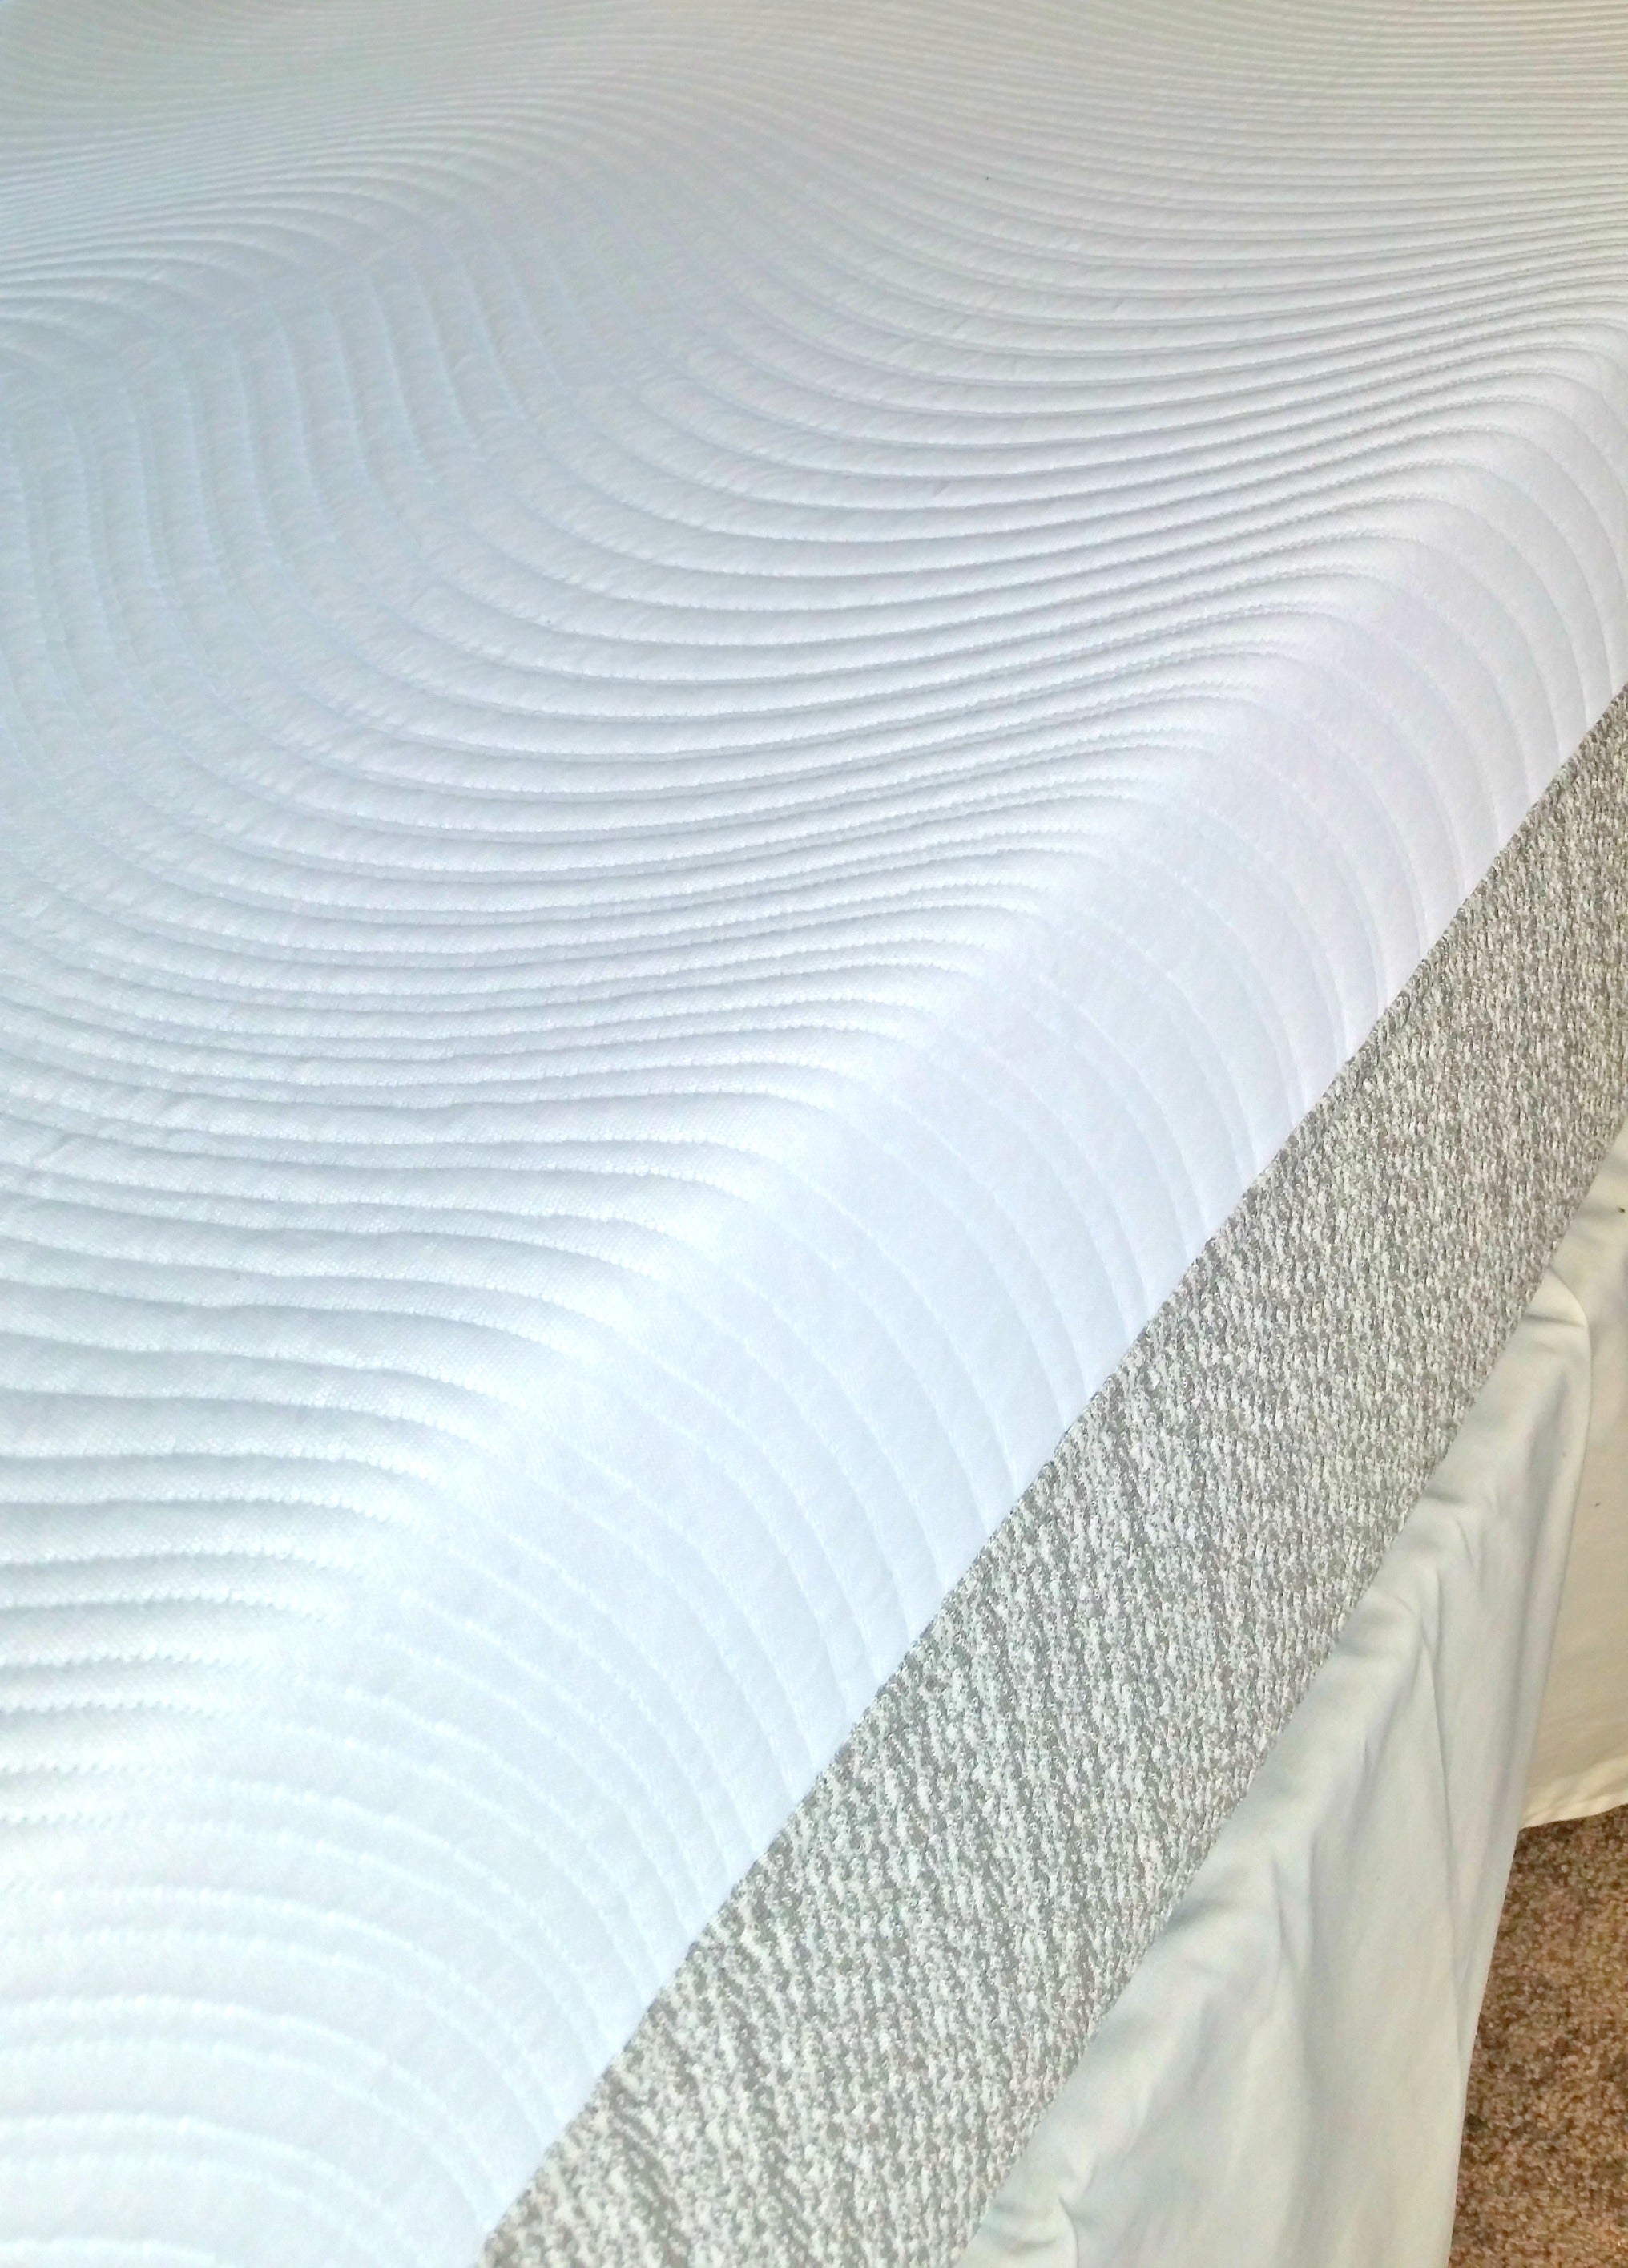 We reviewed a hybrid mattress and have a promo code for it! via @agirlsgottaspa #sleep